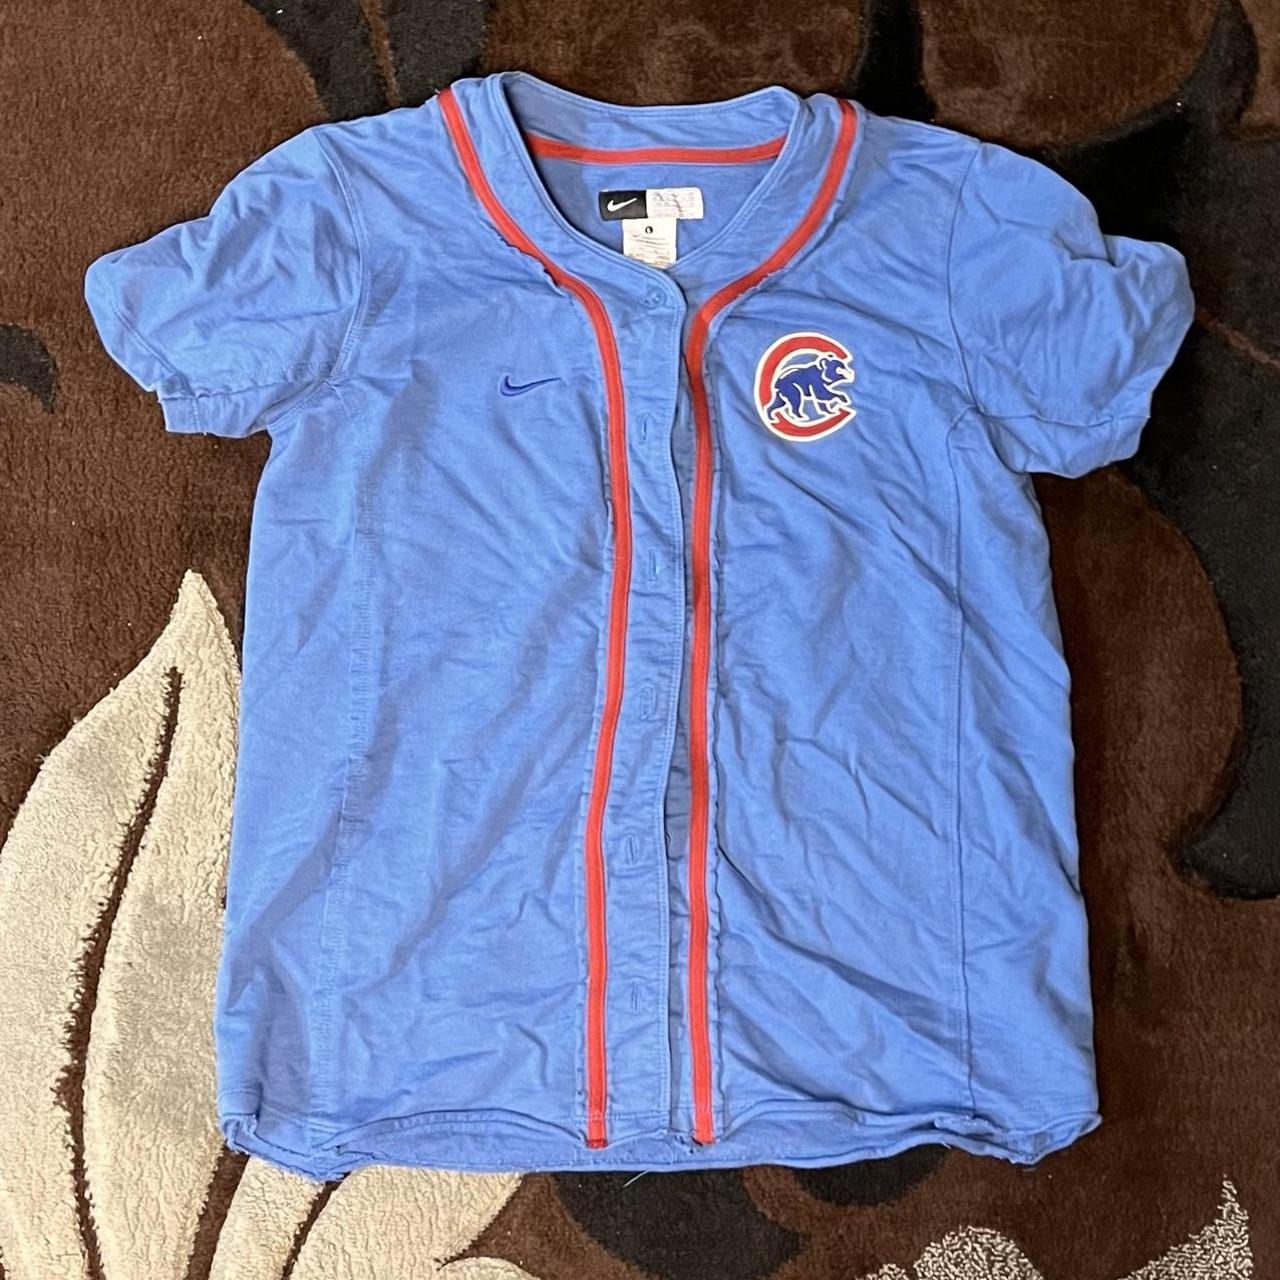 Vintage Youth cubs jersey Youth XL #jersey #cubs - Depop